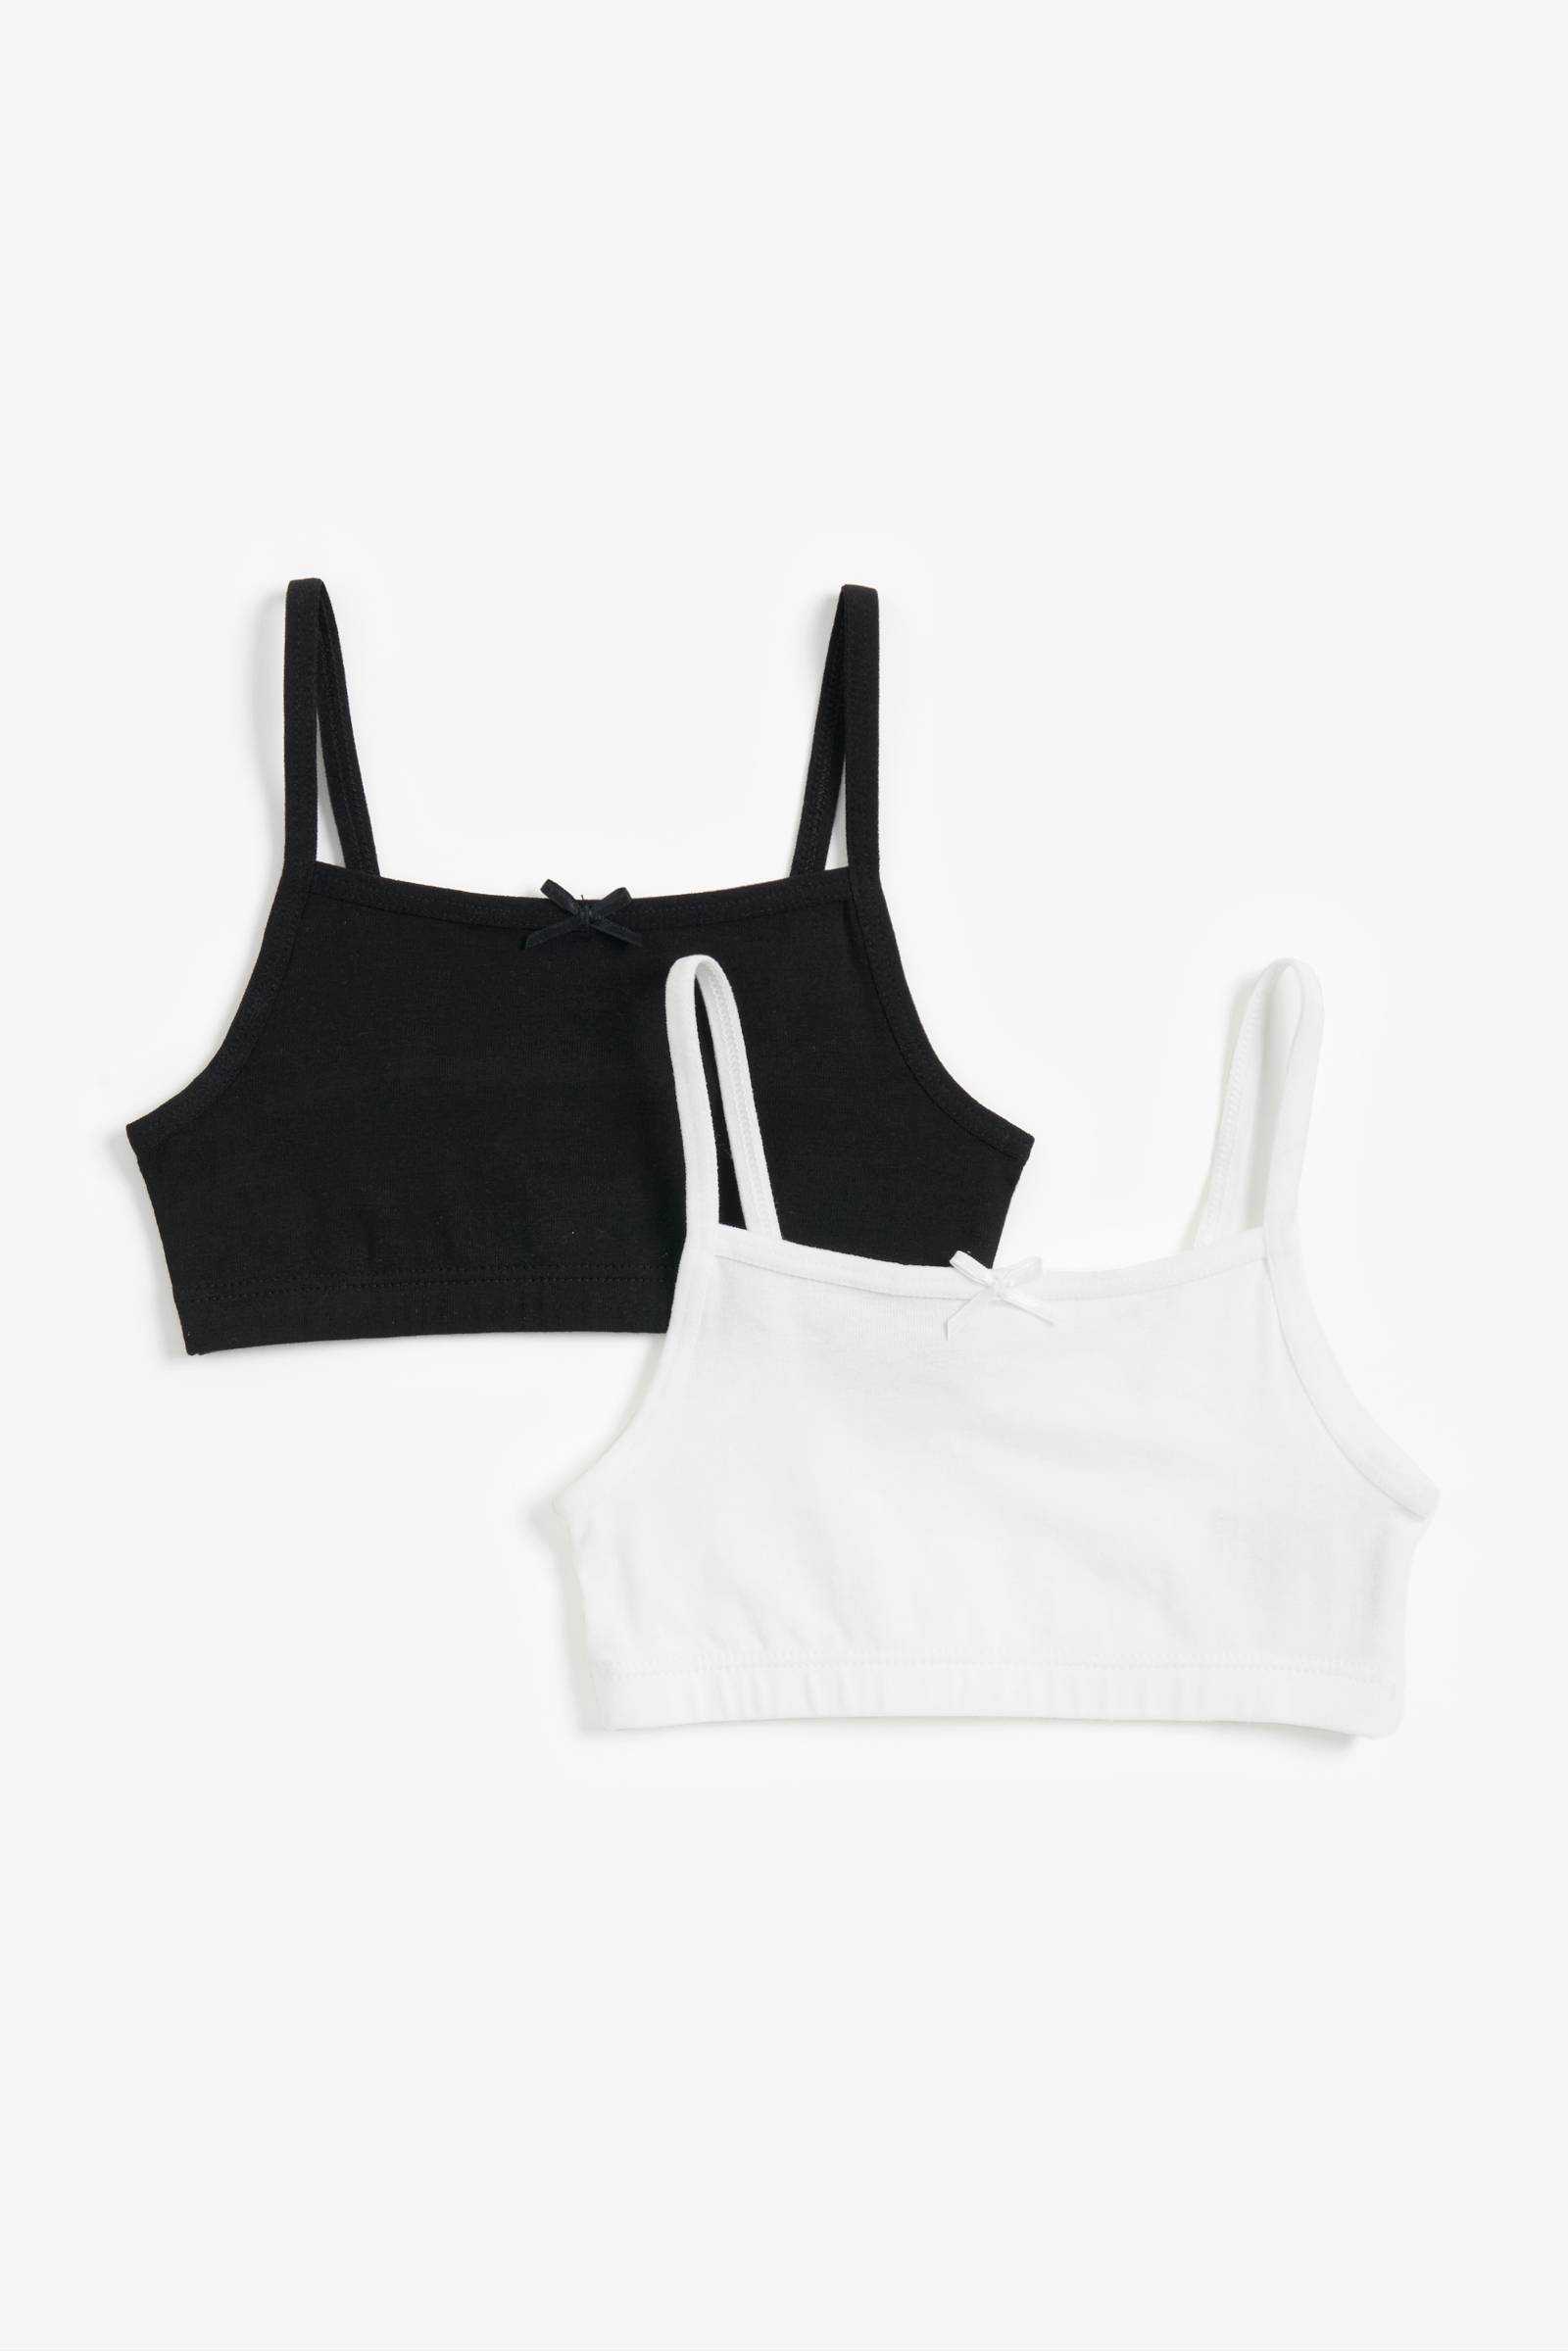 Buy Black and White Crop Top - 2 Pack online